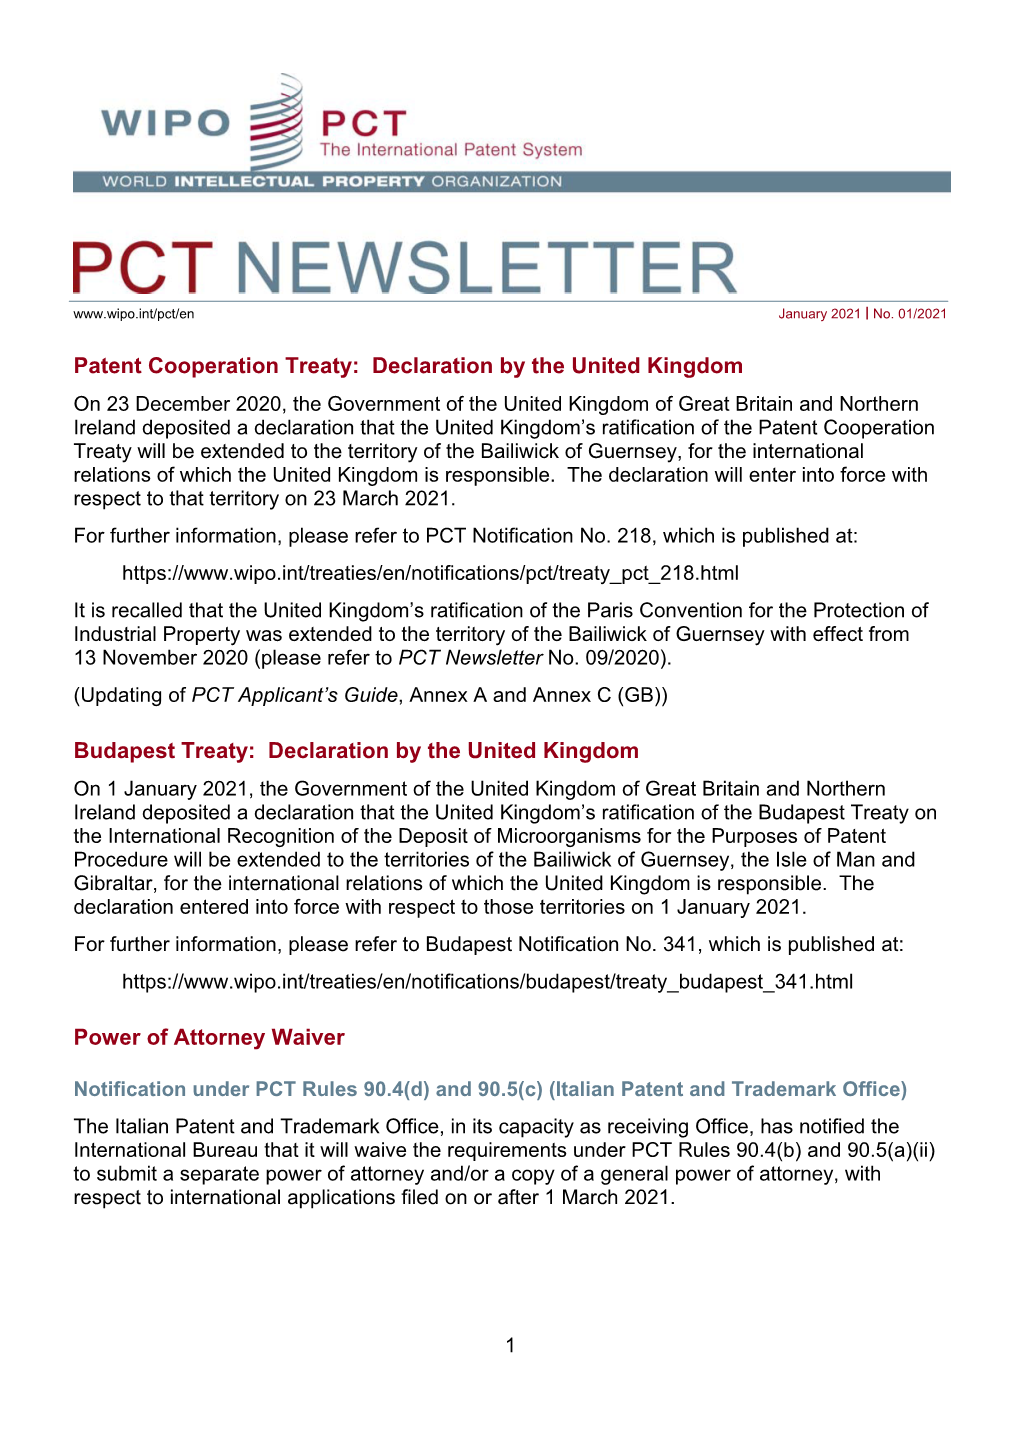 PCT NEWSLETTER No. 01/2021 (January 2021)